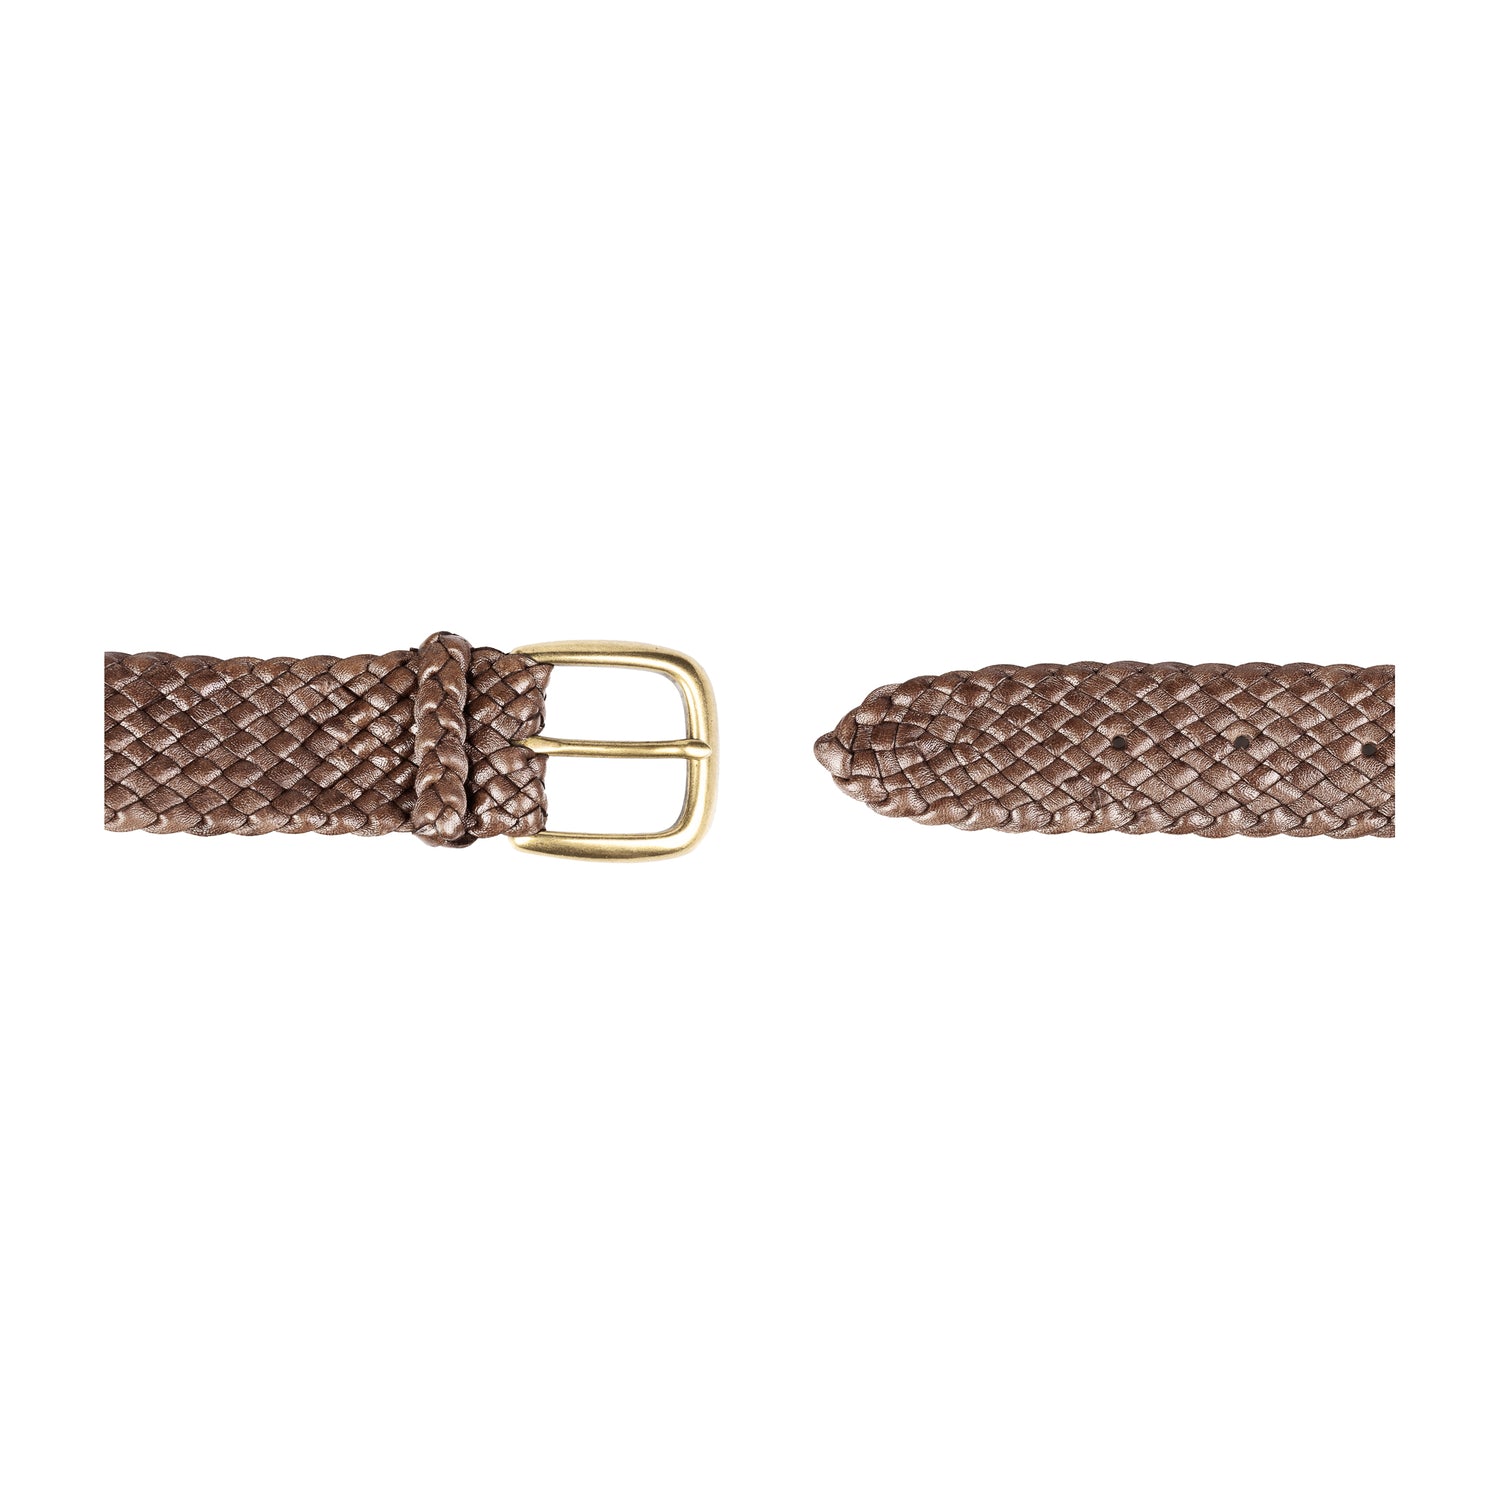 Premium Men's Leather Work Belts: Handcrafted in Australia from Full Grain Leather. solid brass buckle with 10 strands of Australian Kangaroo Leather on white background.